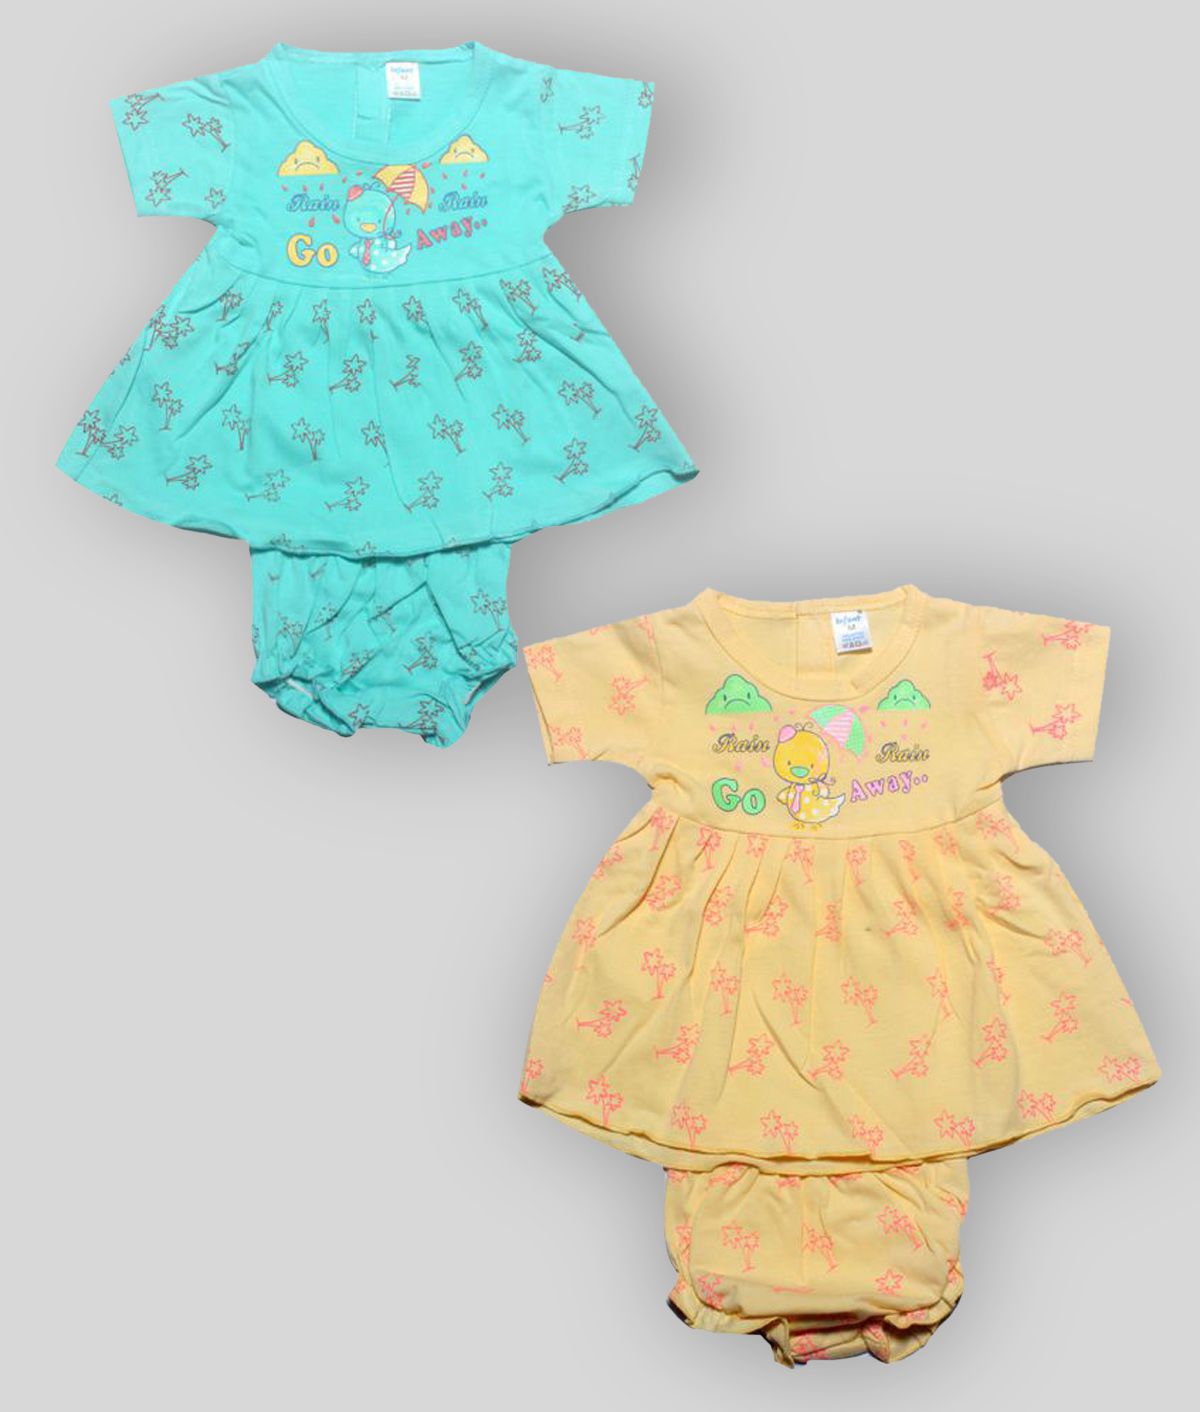     			INFANT Blue & Yellow baby girls cotton half sleeve back open frock dress Pack of 2